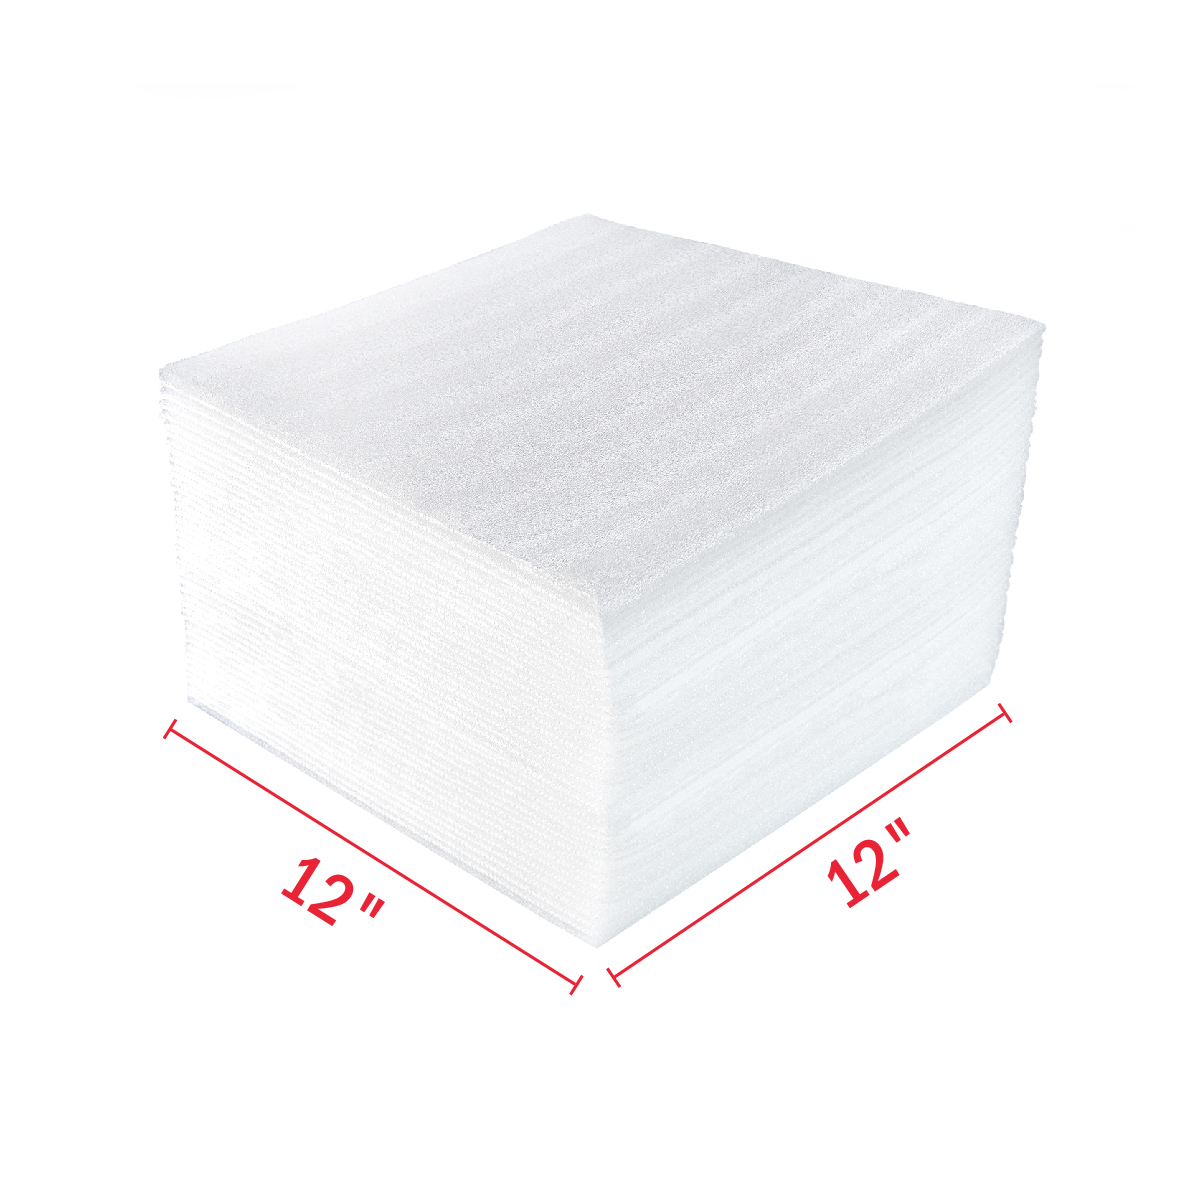 Details about   200 Foam Packing Wrap Sheets 12x12 1/8" Thick Cushion Shipping Moving NOT Pouch 